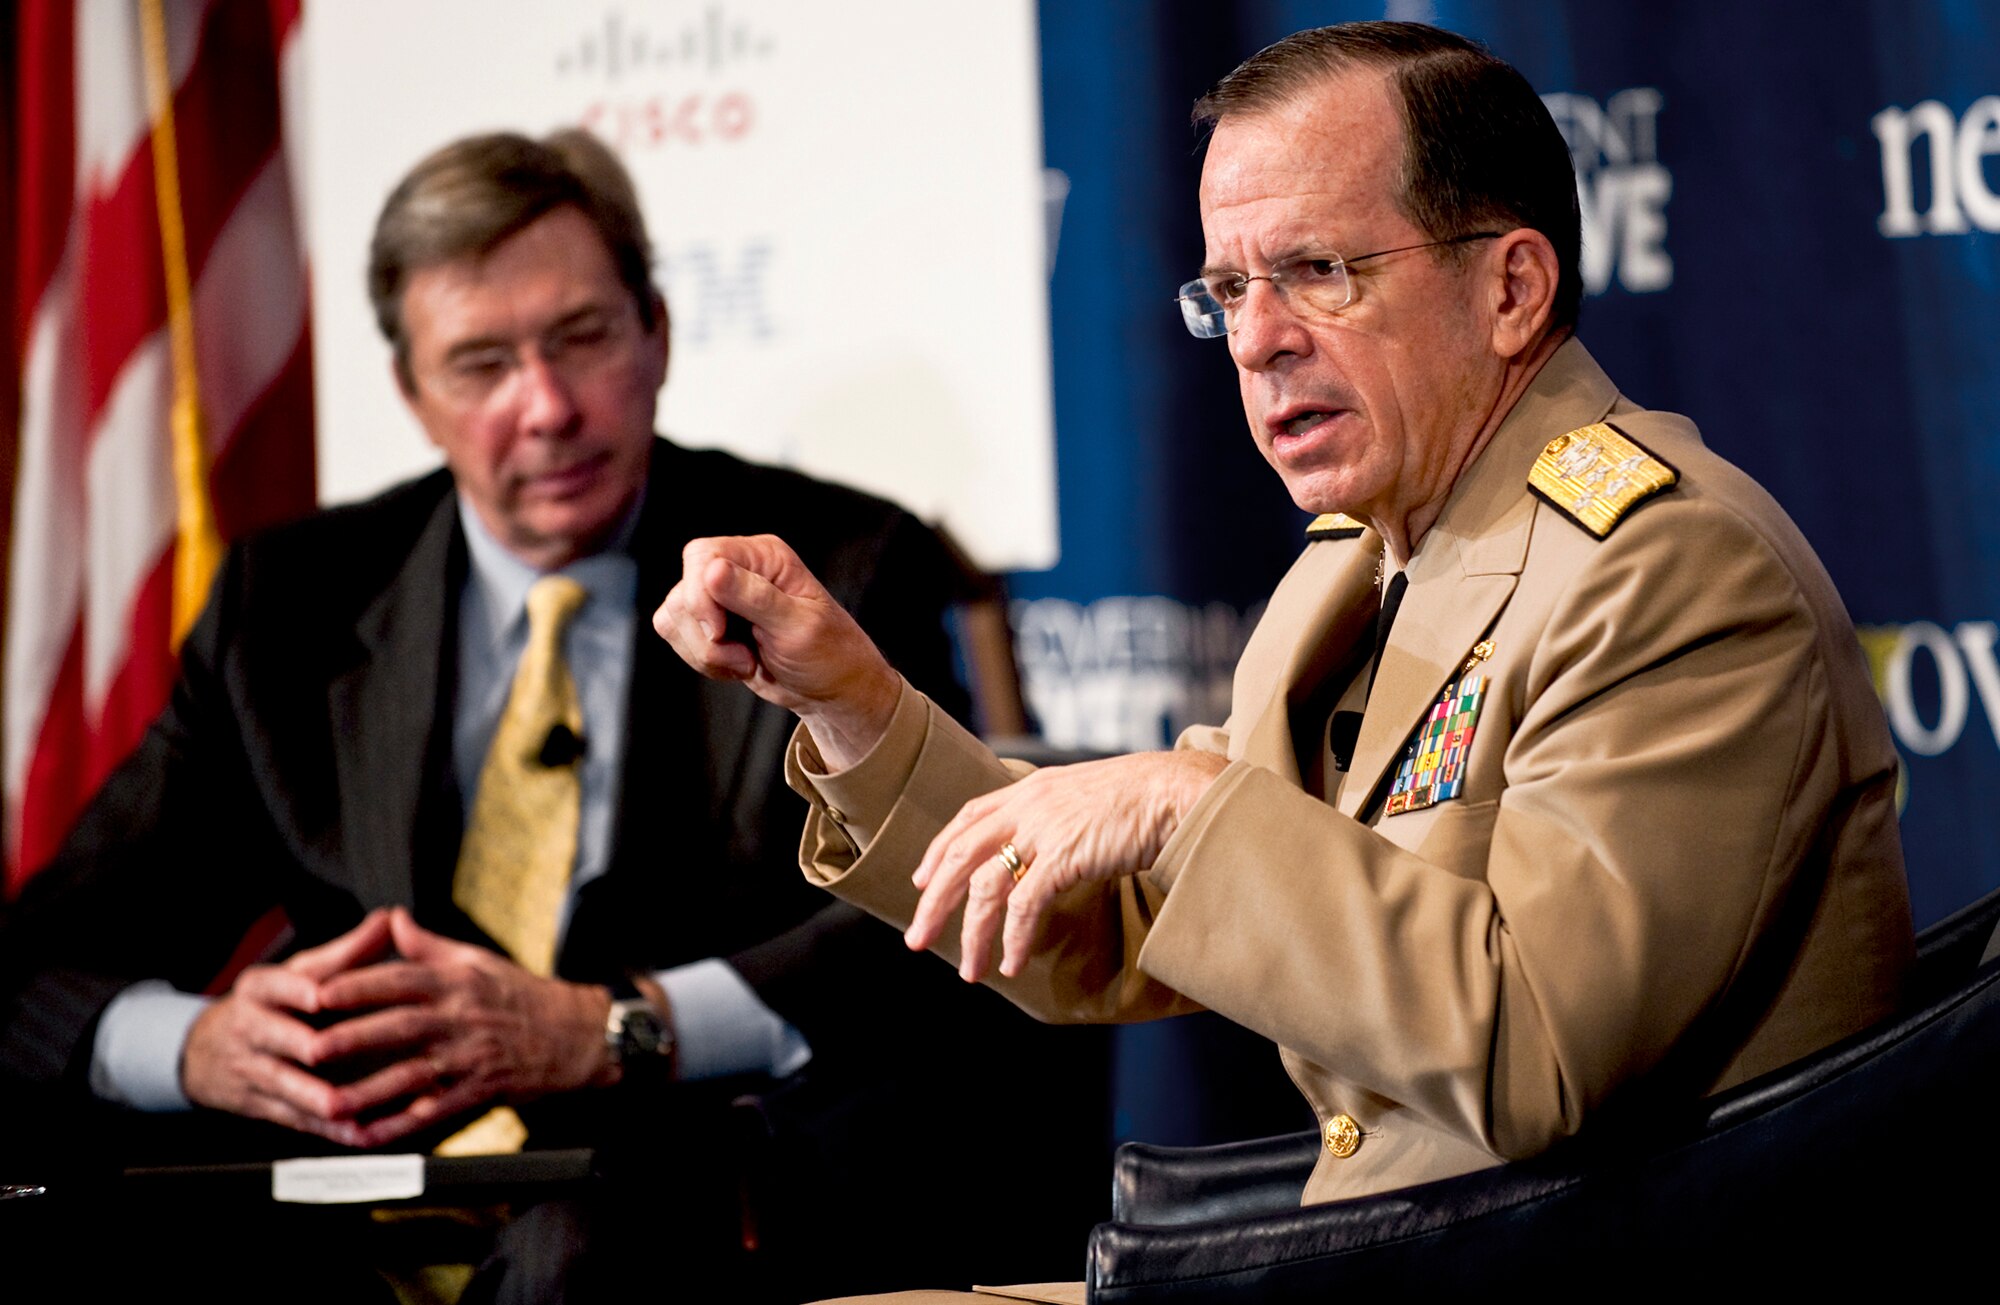 Navy Adm. Mike Mullen, the chairman of the Joint Chiefs of Staff, addresses participants at the leadership breakfast for the Government Executive Media Groups April 28, 2011, at the National Press Club in Washington. (Defense Department photo/Petty Officer 1st Class Chad J. McNeeley)